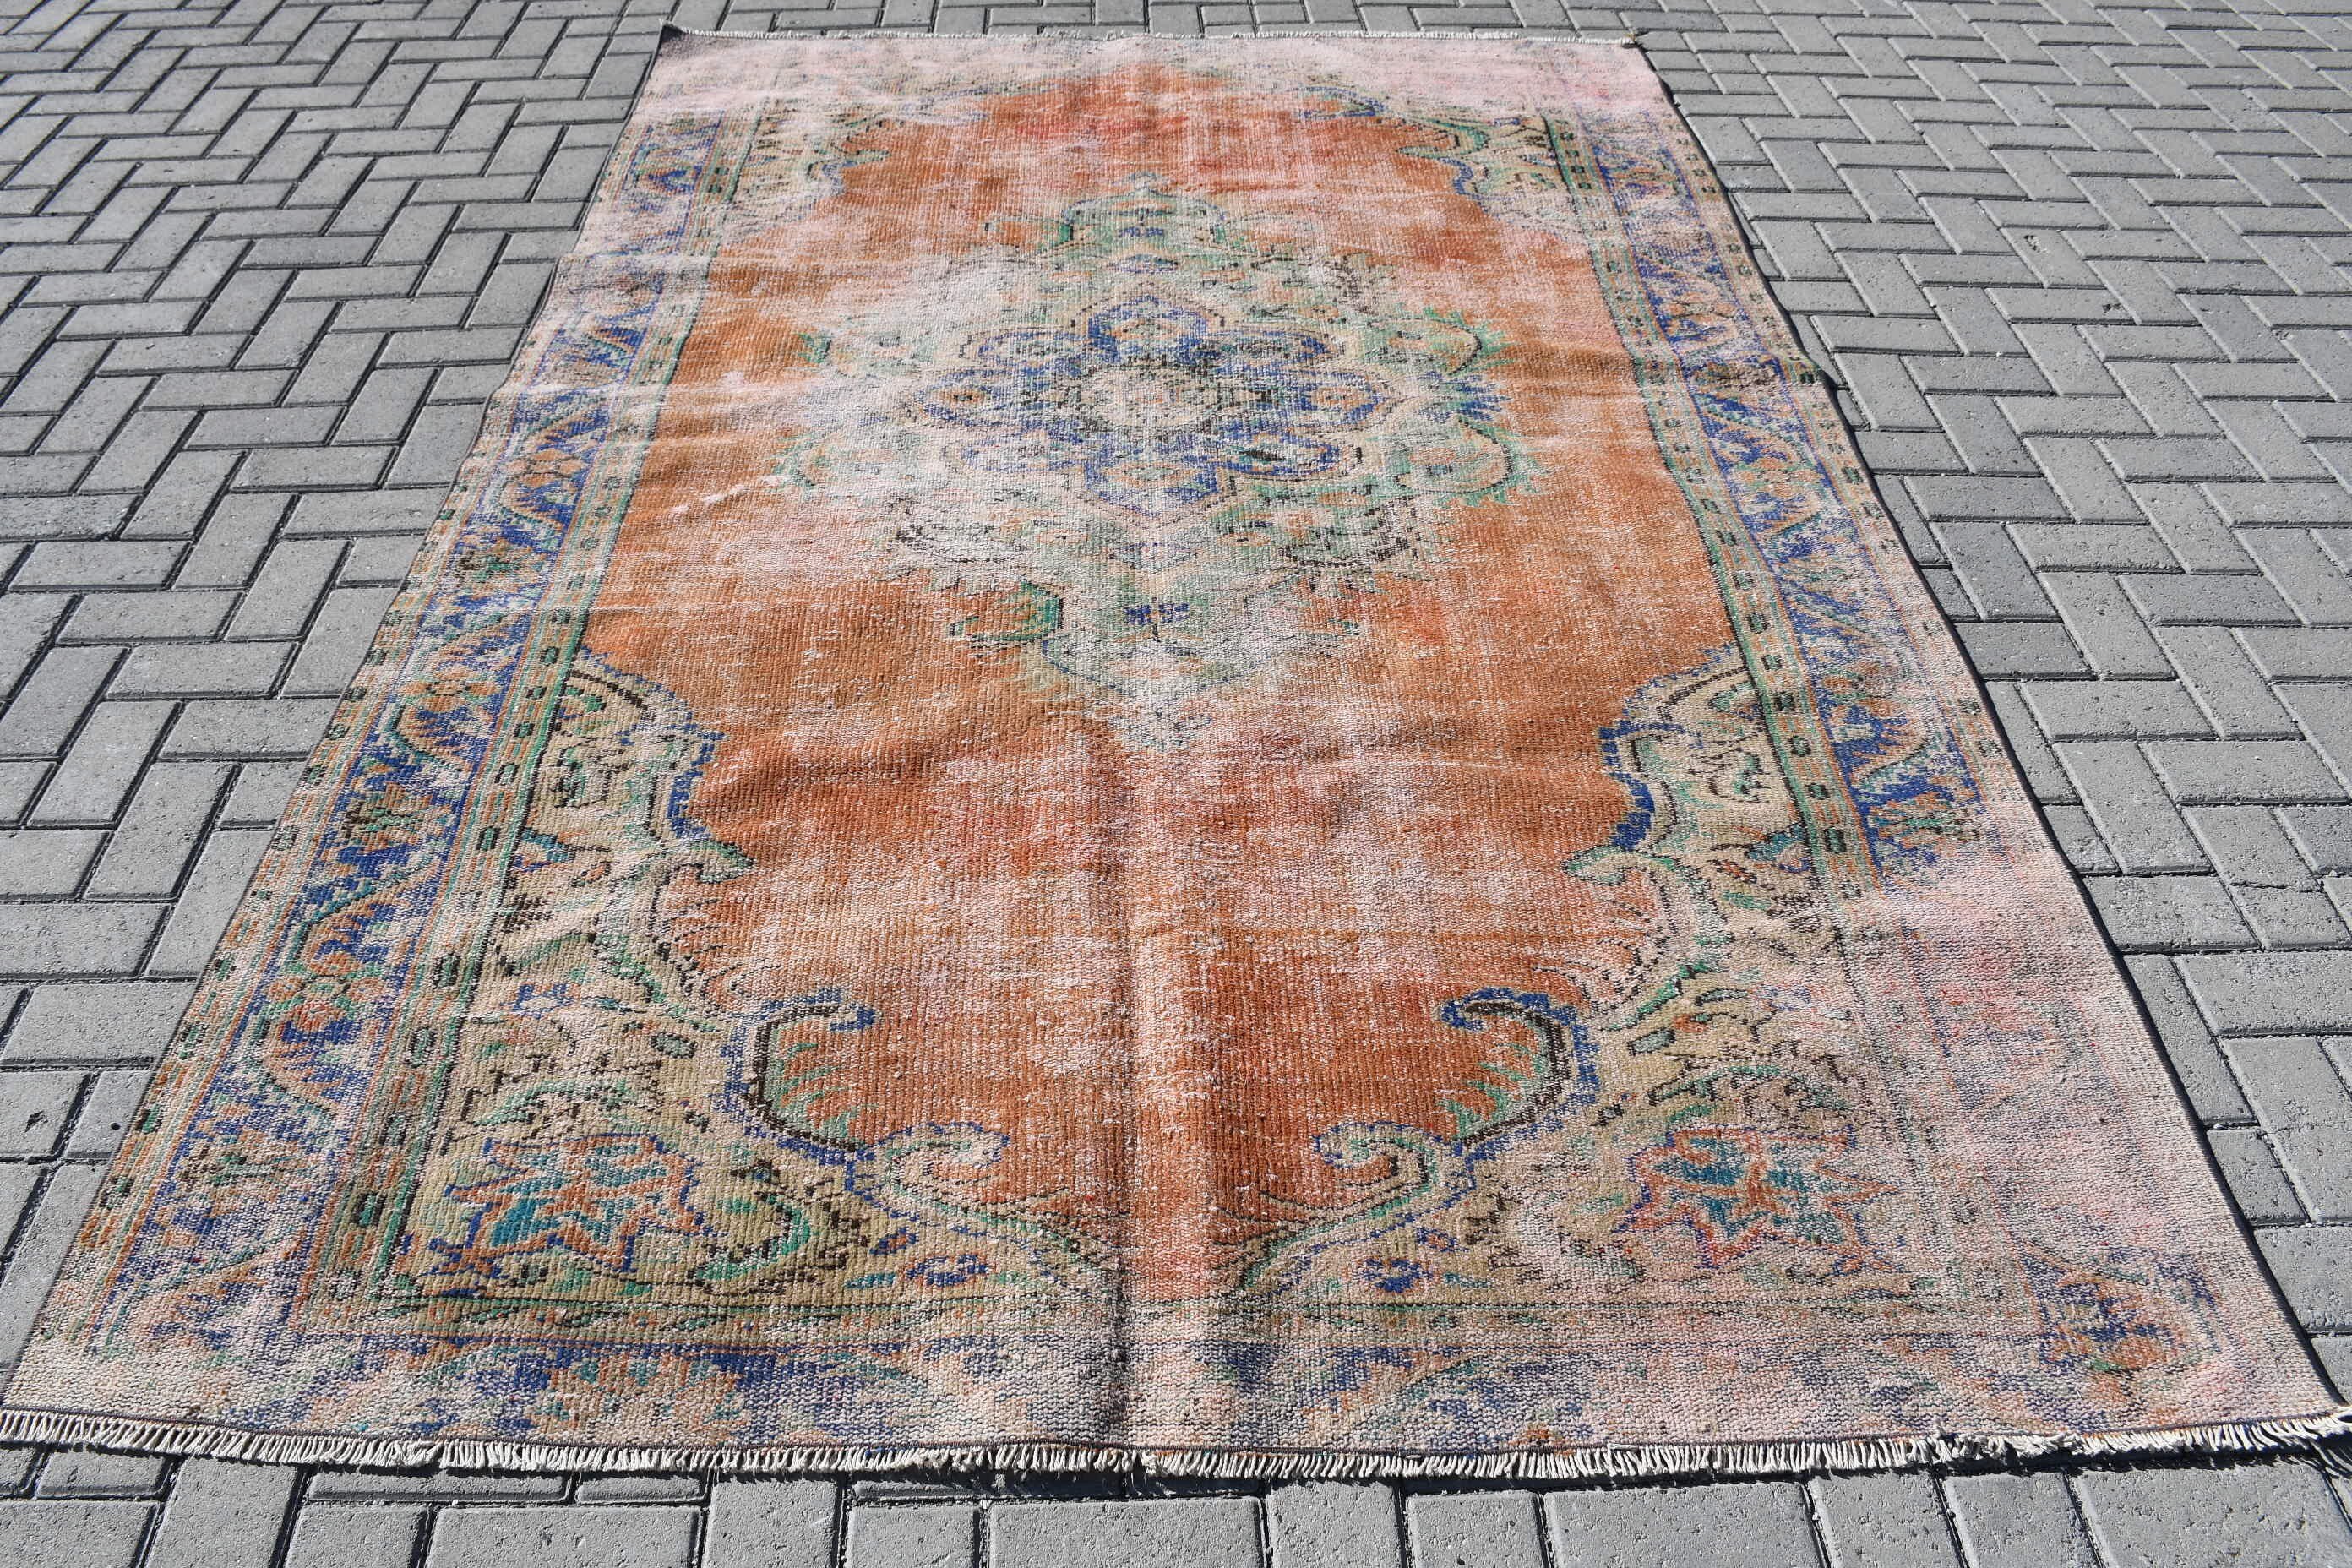 Turkish Rugs, Salon Rugs, Vintage Rug, Cool Rug, Red Home Decor Rug, Dining Room Rugs, Anatolian Rug, Hand Woven Rug, 5.9x9 ft Large Rugs